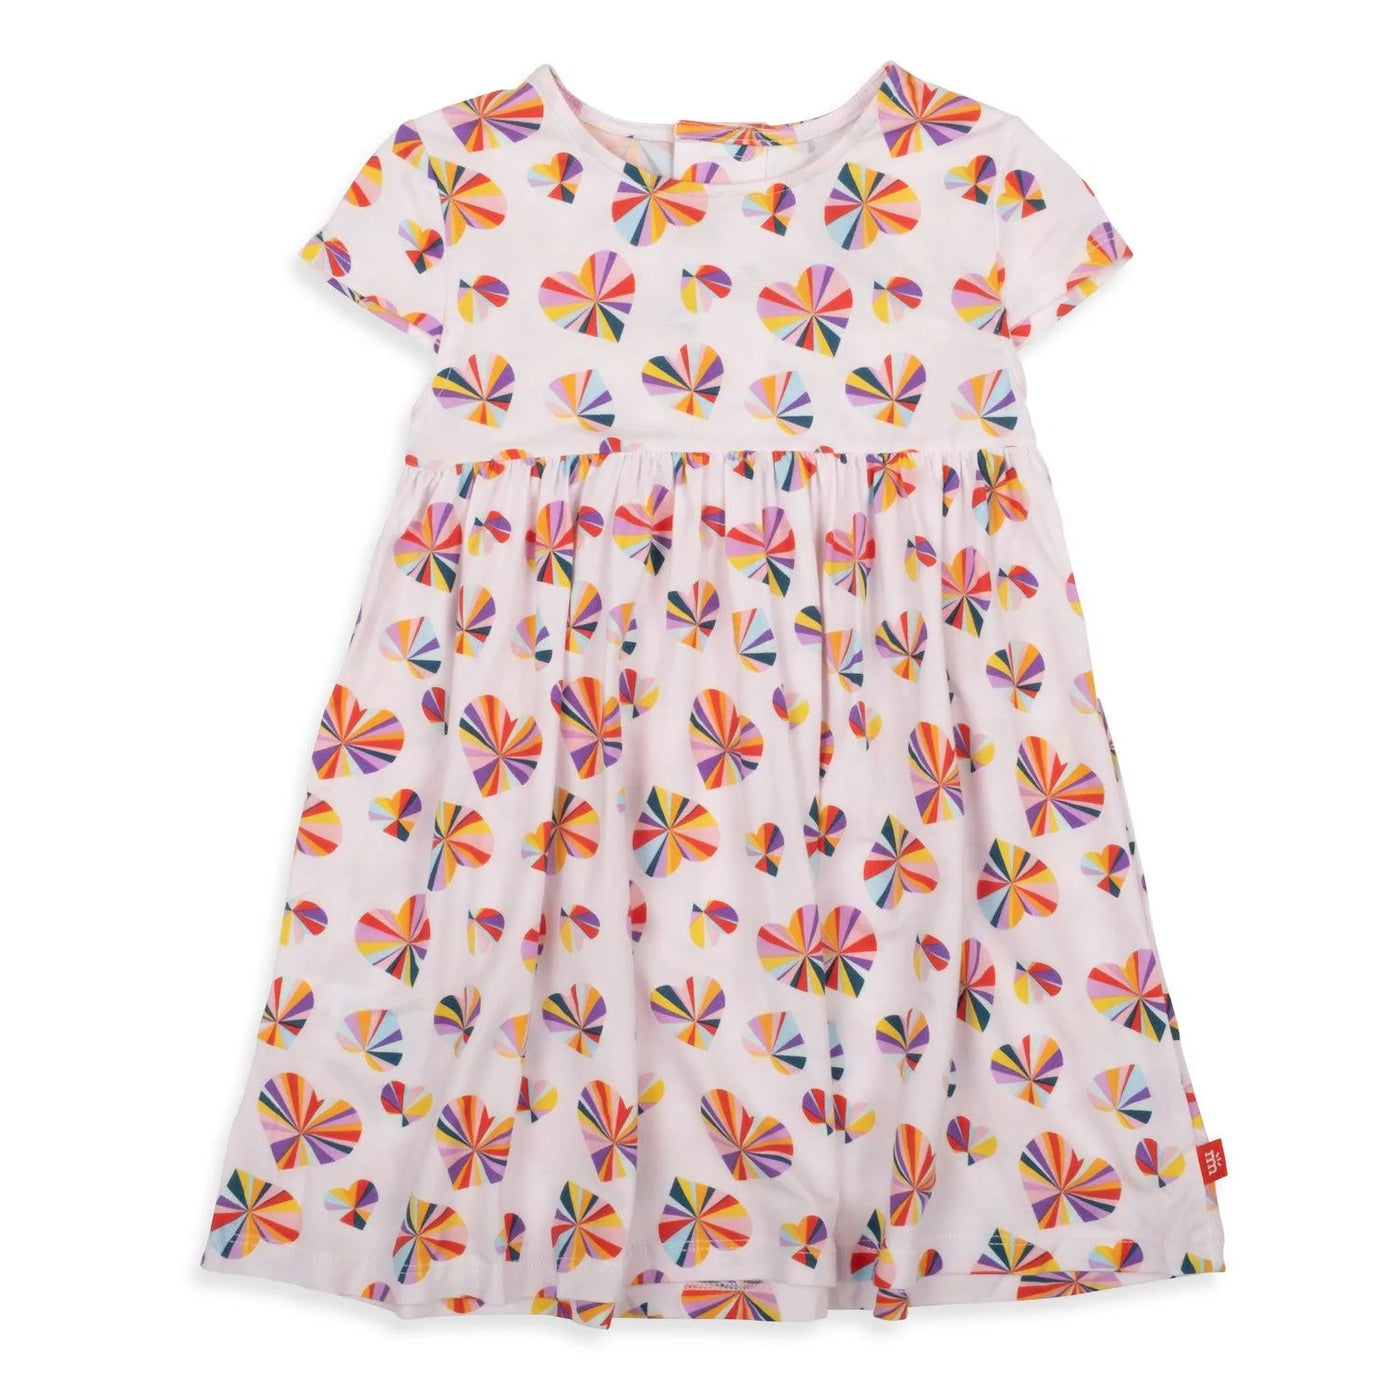 Groove Is In The Heart Modal Toddler Dress